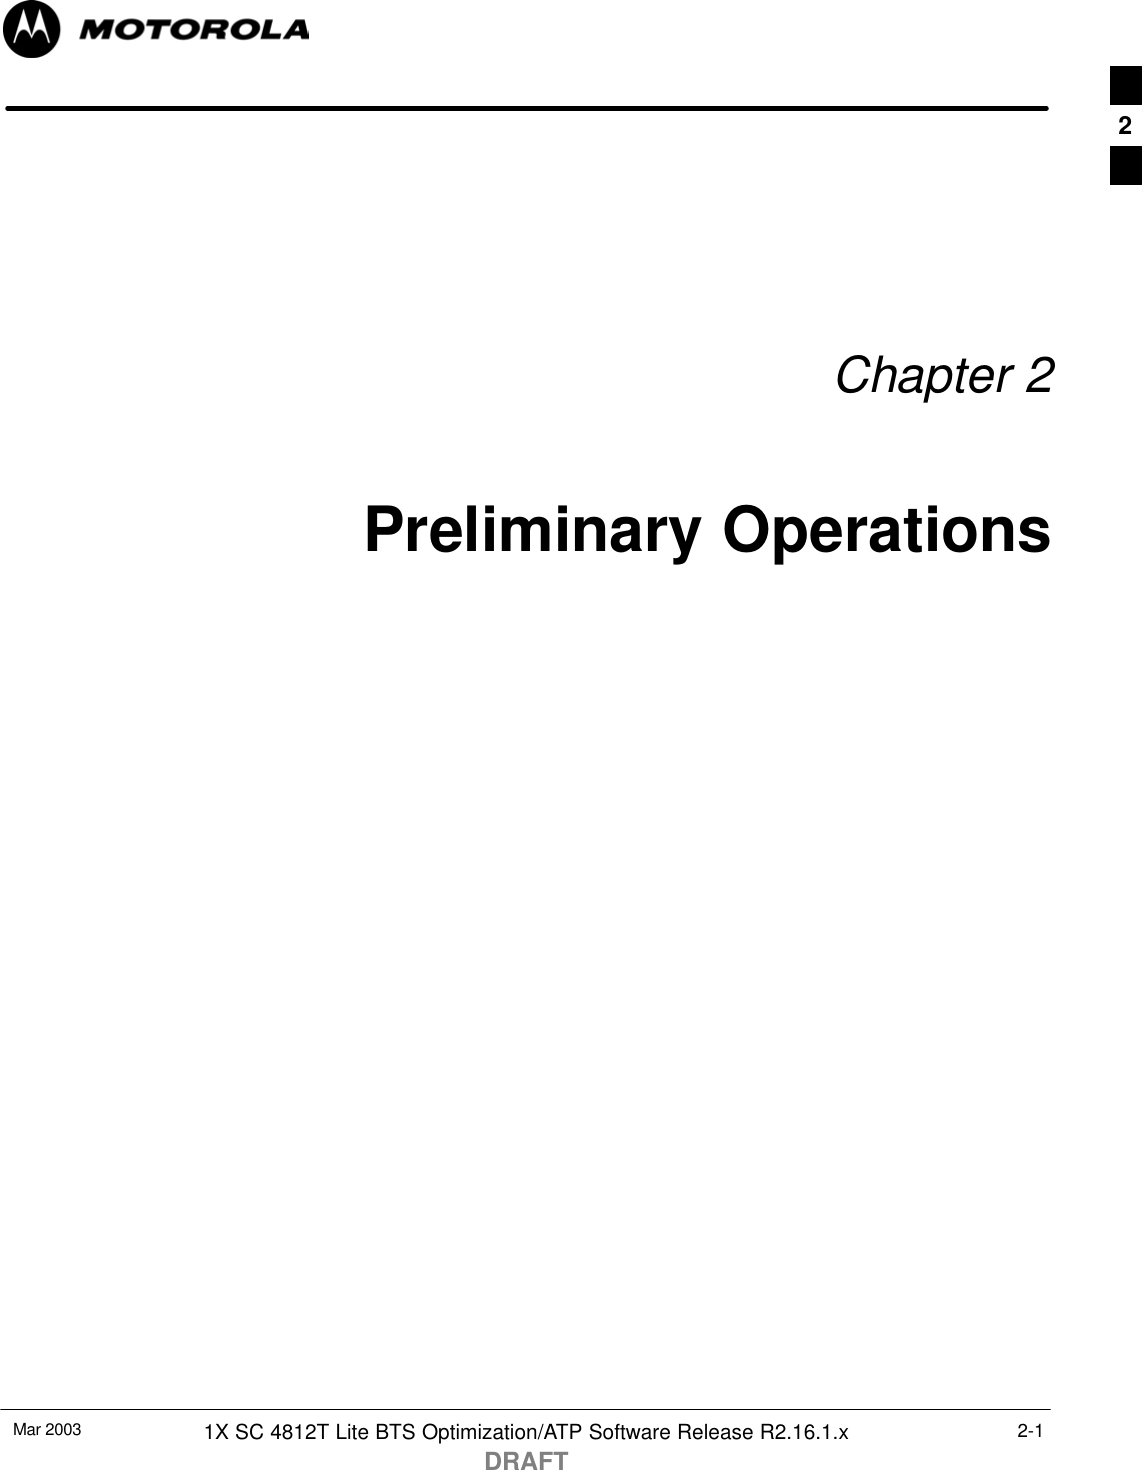 Mar 2003 1X SC 4812T Lite BTS Optimization/ATP Software Release R2.16.1.xDRAFT2-1Chapter 2Preliminary Operations2